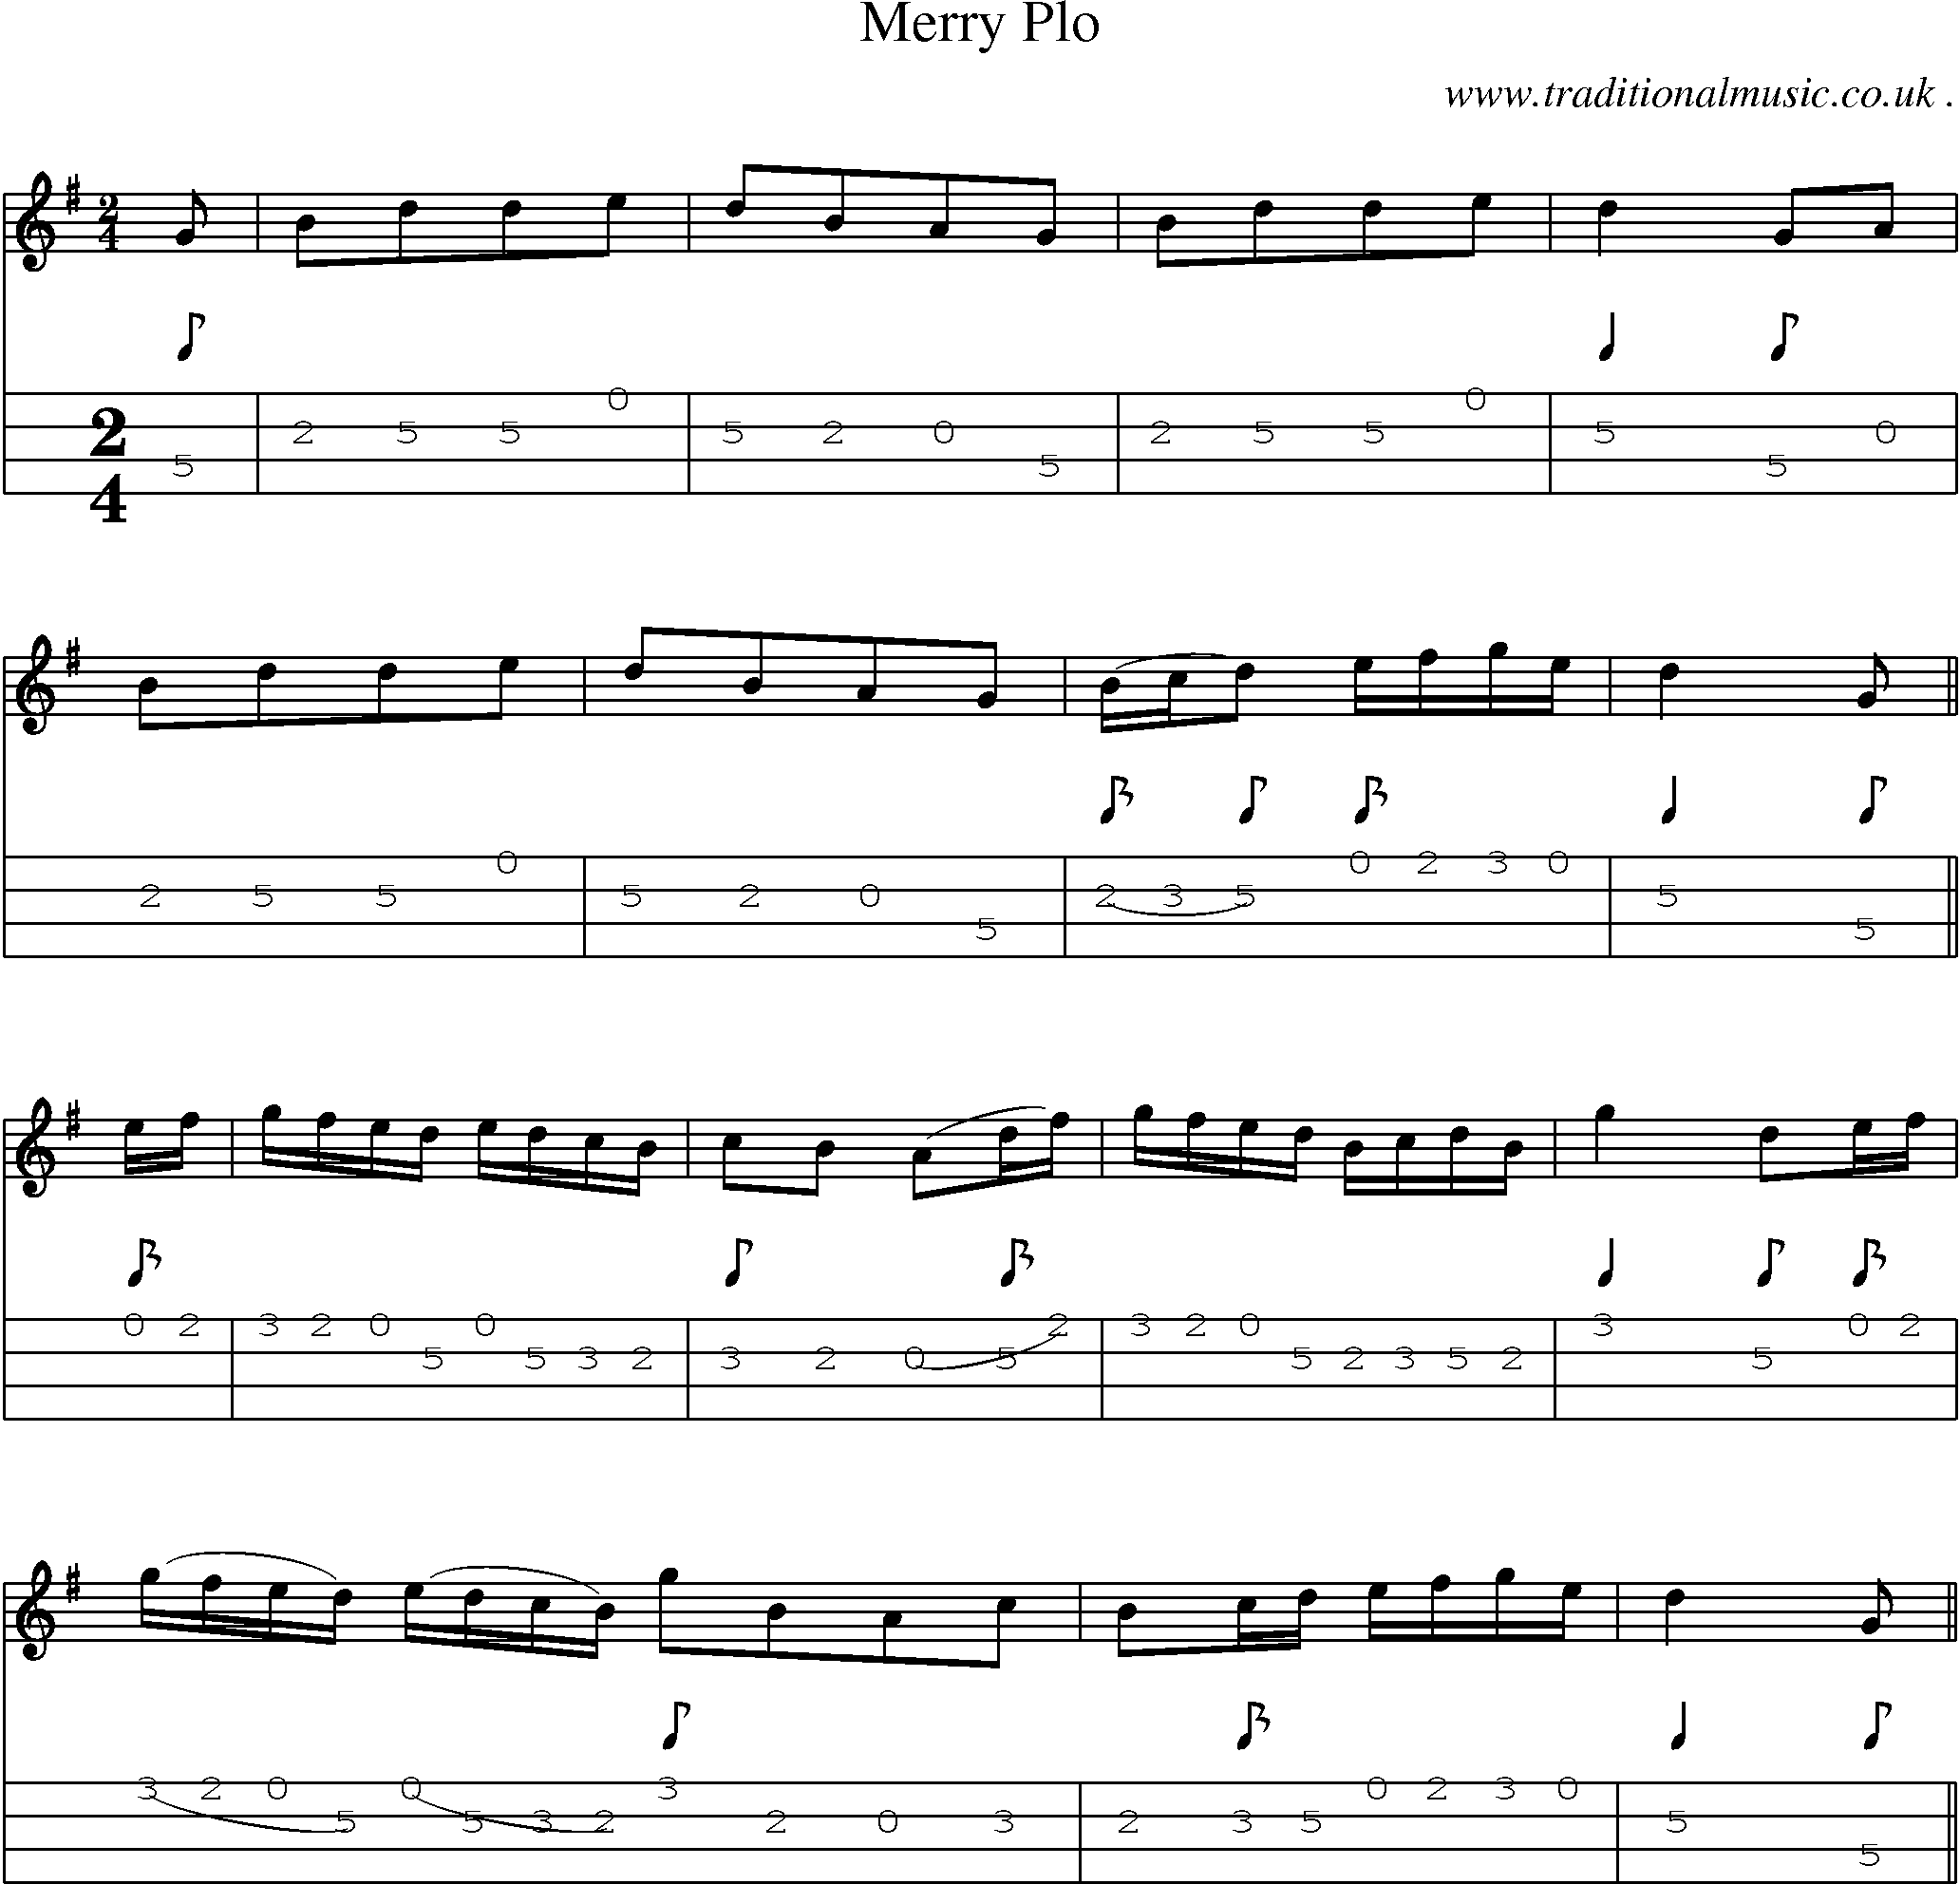 Sheet-Music and Mandolin Tabs for Merry Plo